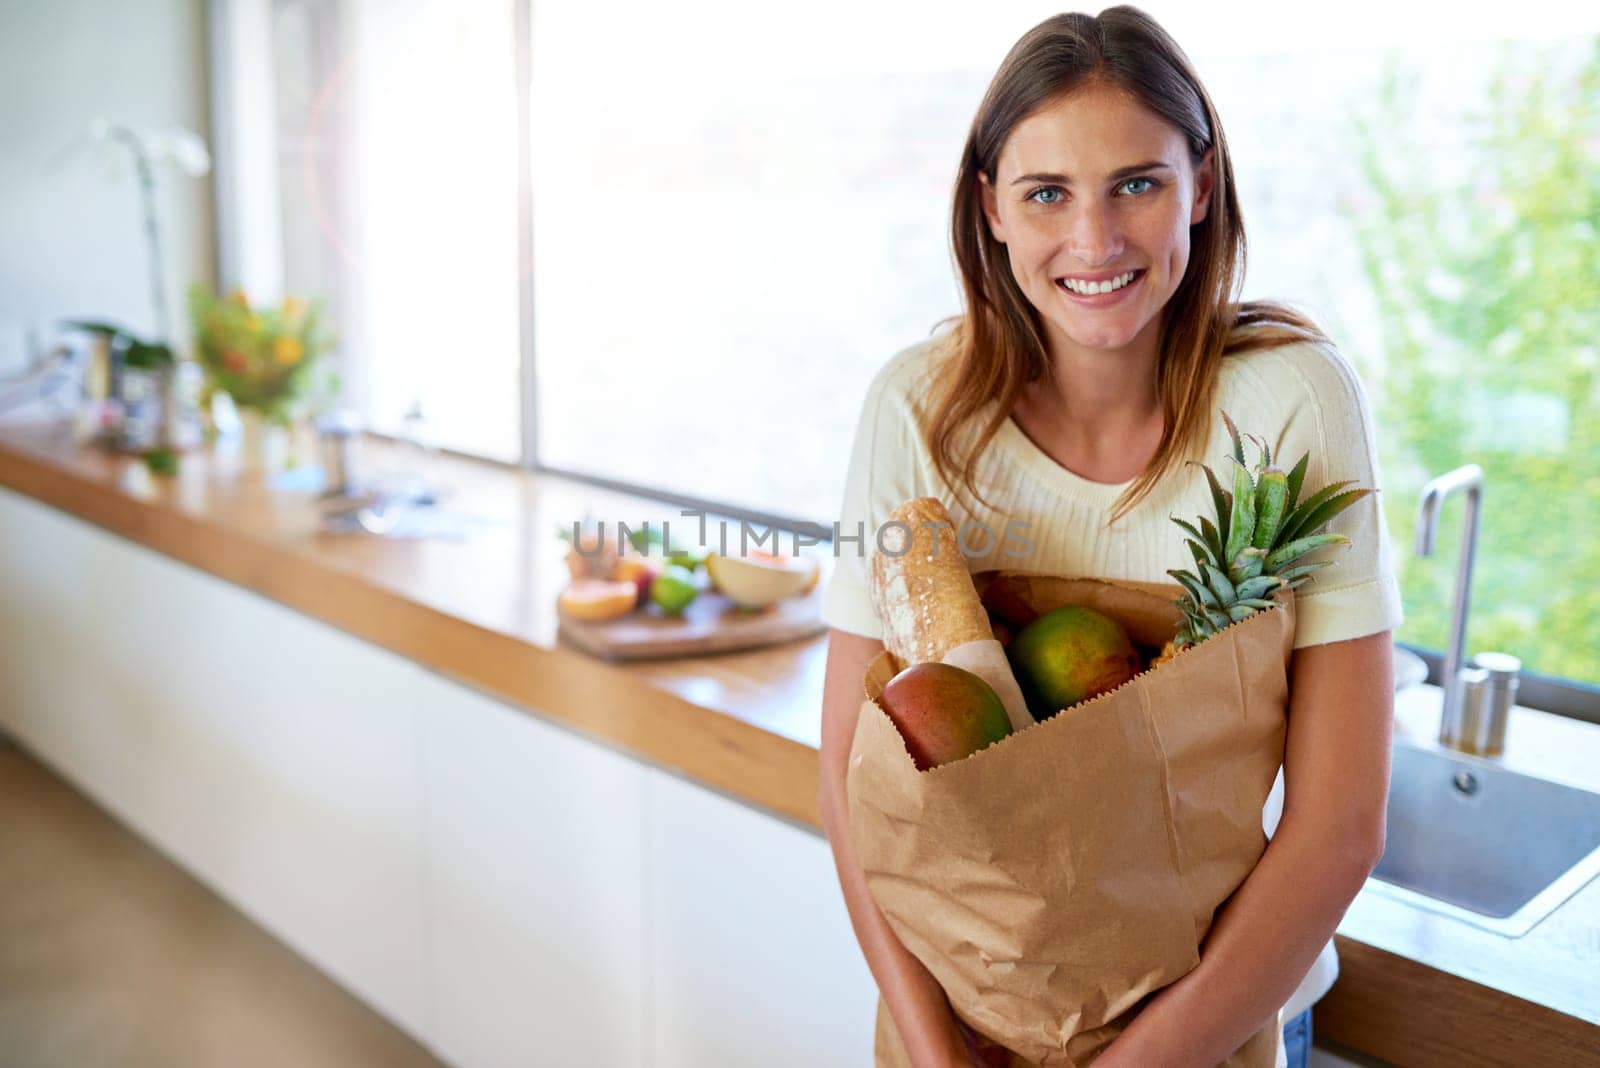 Groceries, paper bag and portrait of woman in kitchen with food, cooking or meal prep with smile. Diet, wellness and person in home with shopping, delivery and ingredients for dinner in apartment